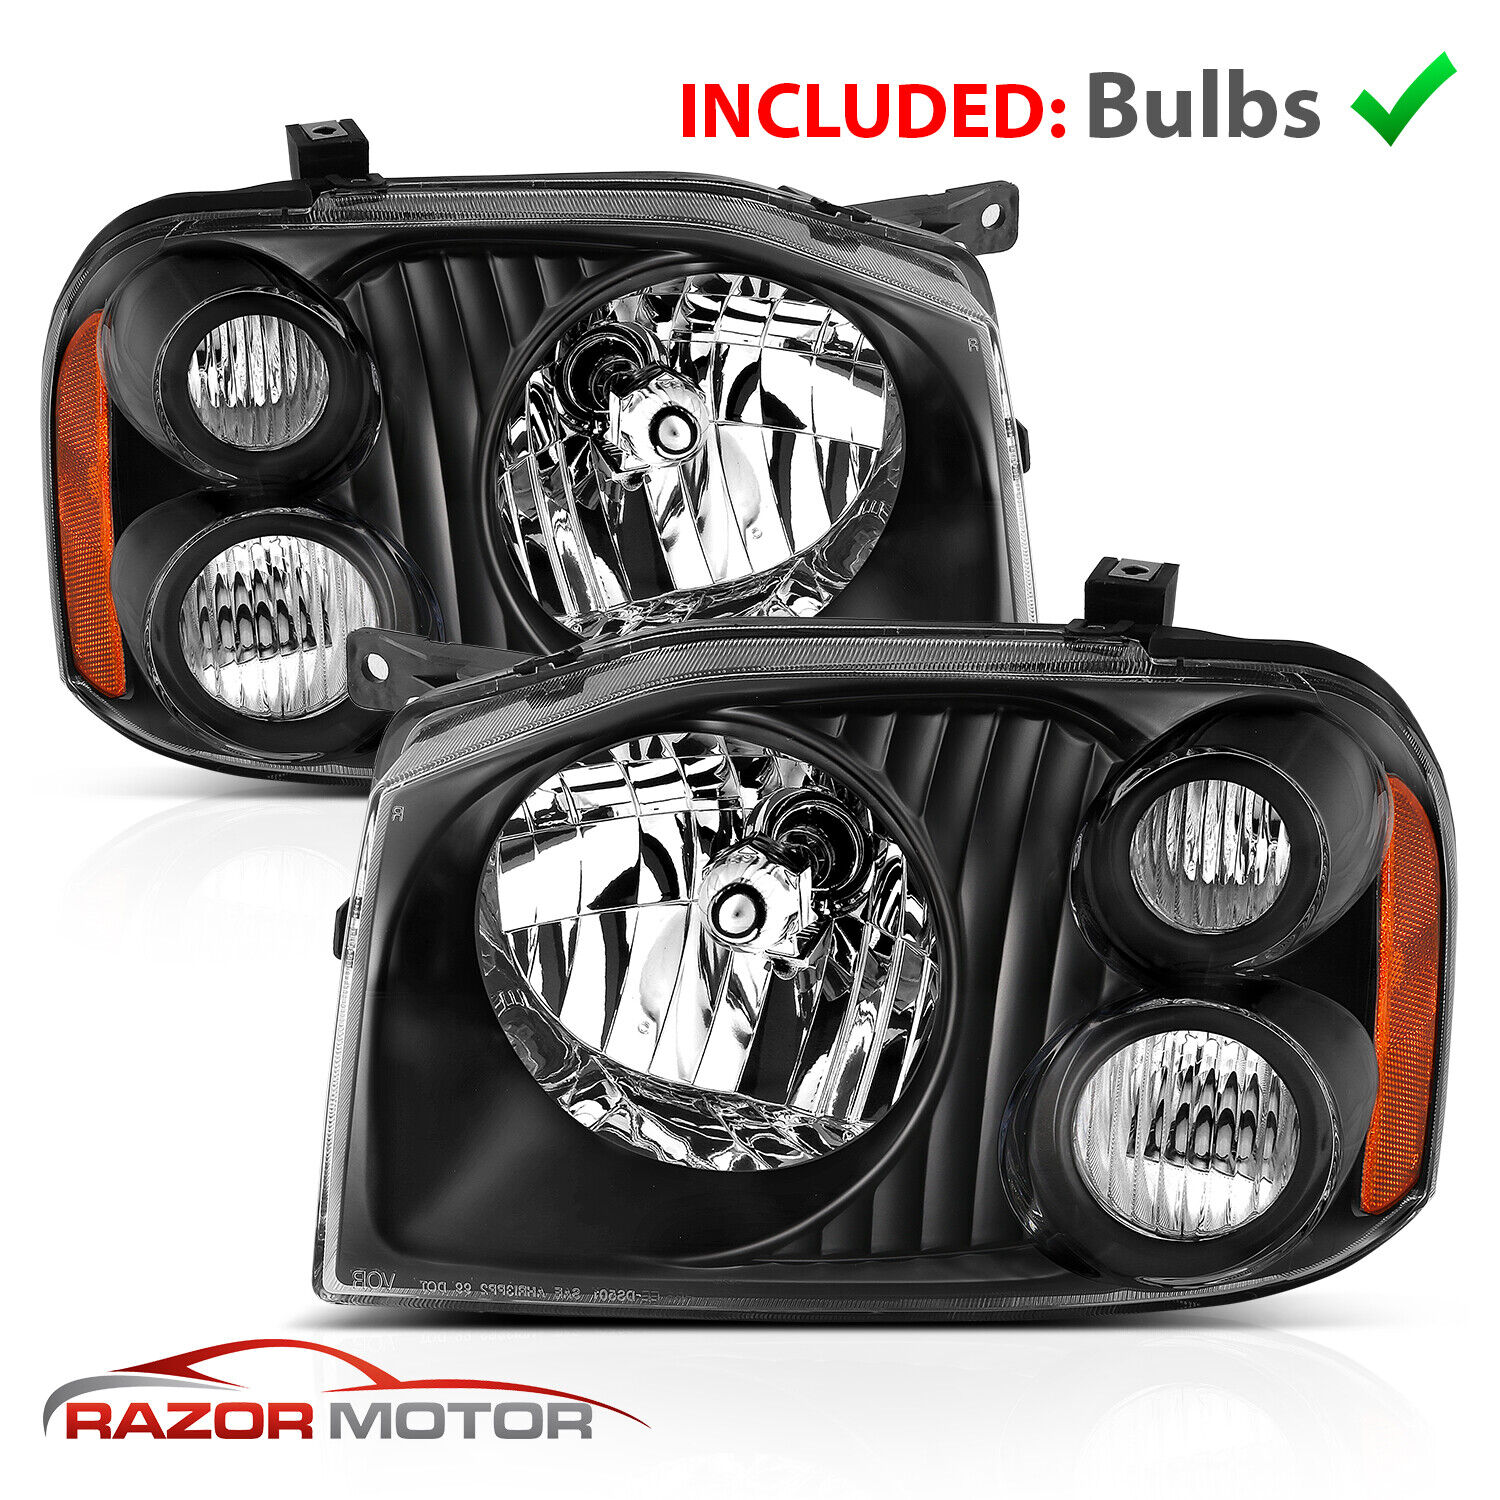 2001-2004 Replacement Black Headlight Pair for Frontier With Hi/Lo Bulb